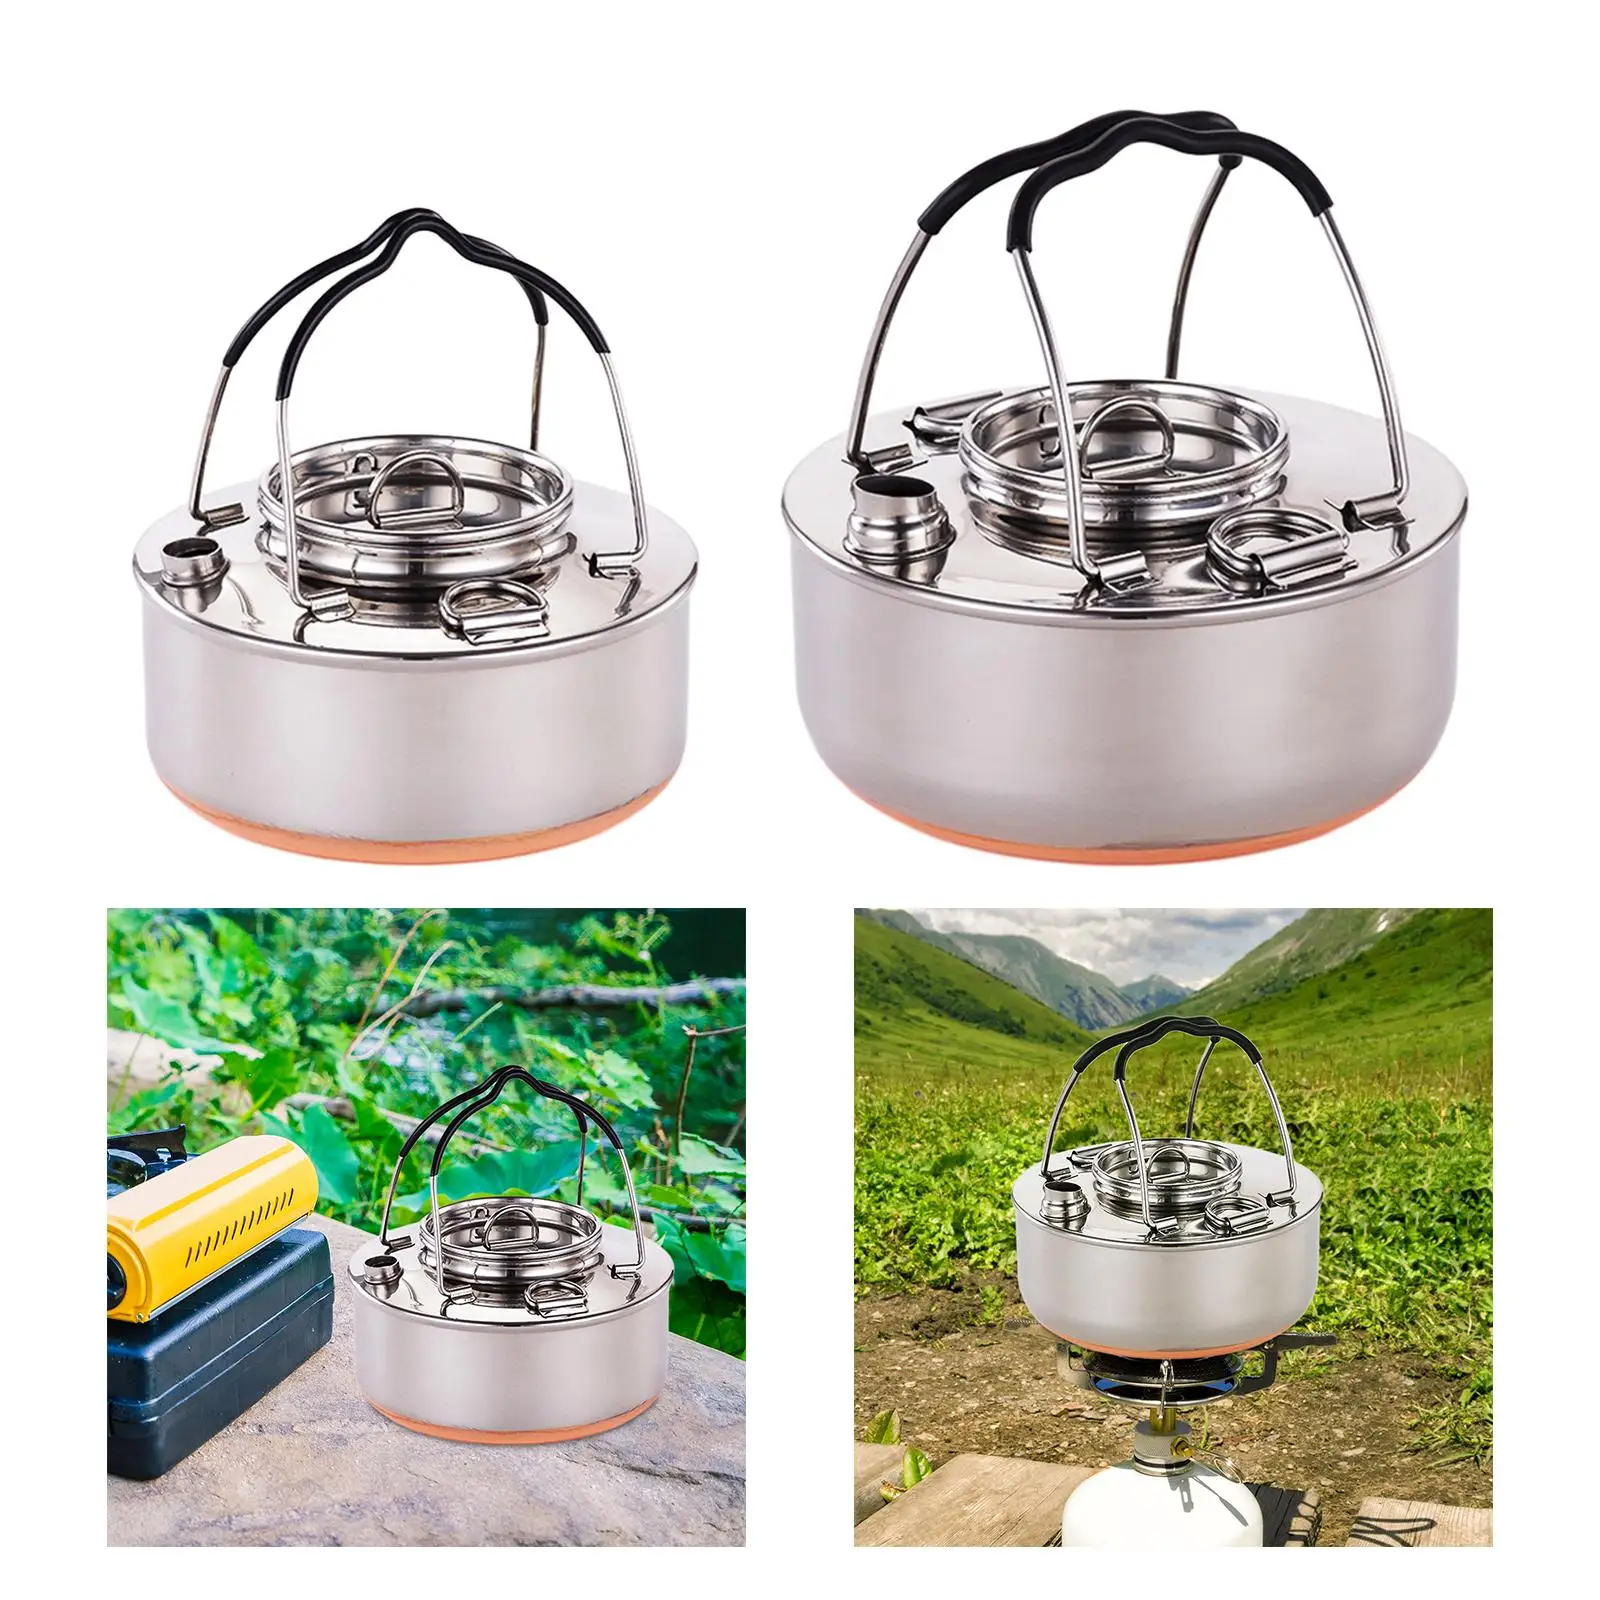 Camping Kettle Stainless Steel Durable Lightweight Coffee Tea Pot Teapot for Hiking Fishing Mountaineering Backyard Backpacking